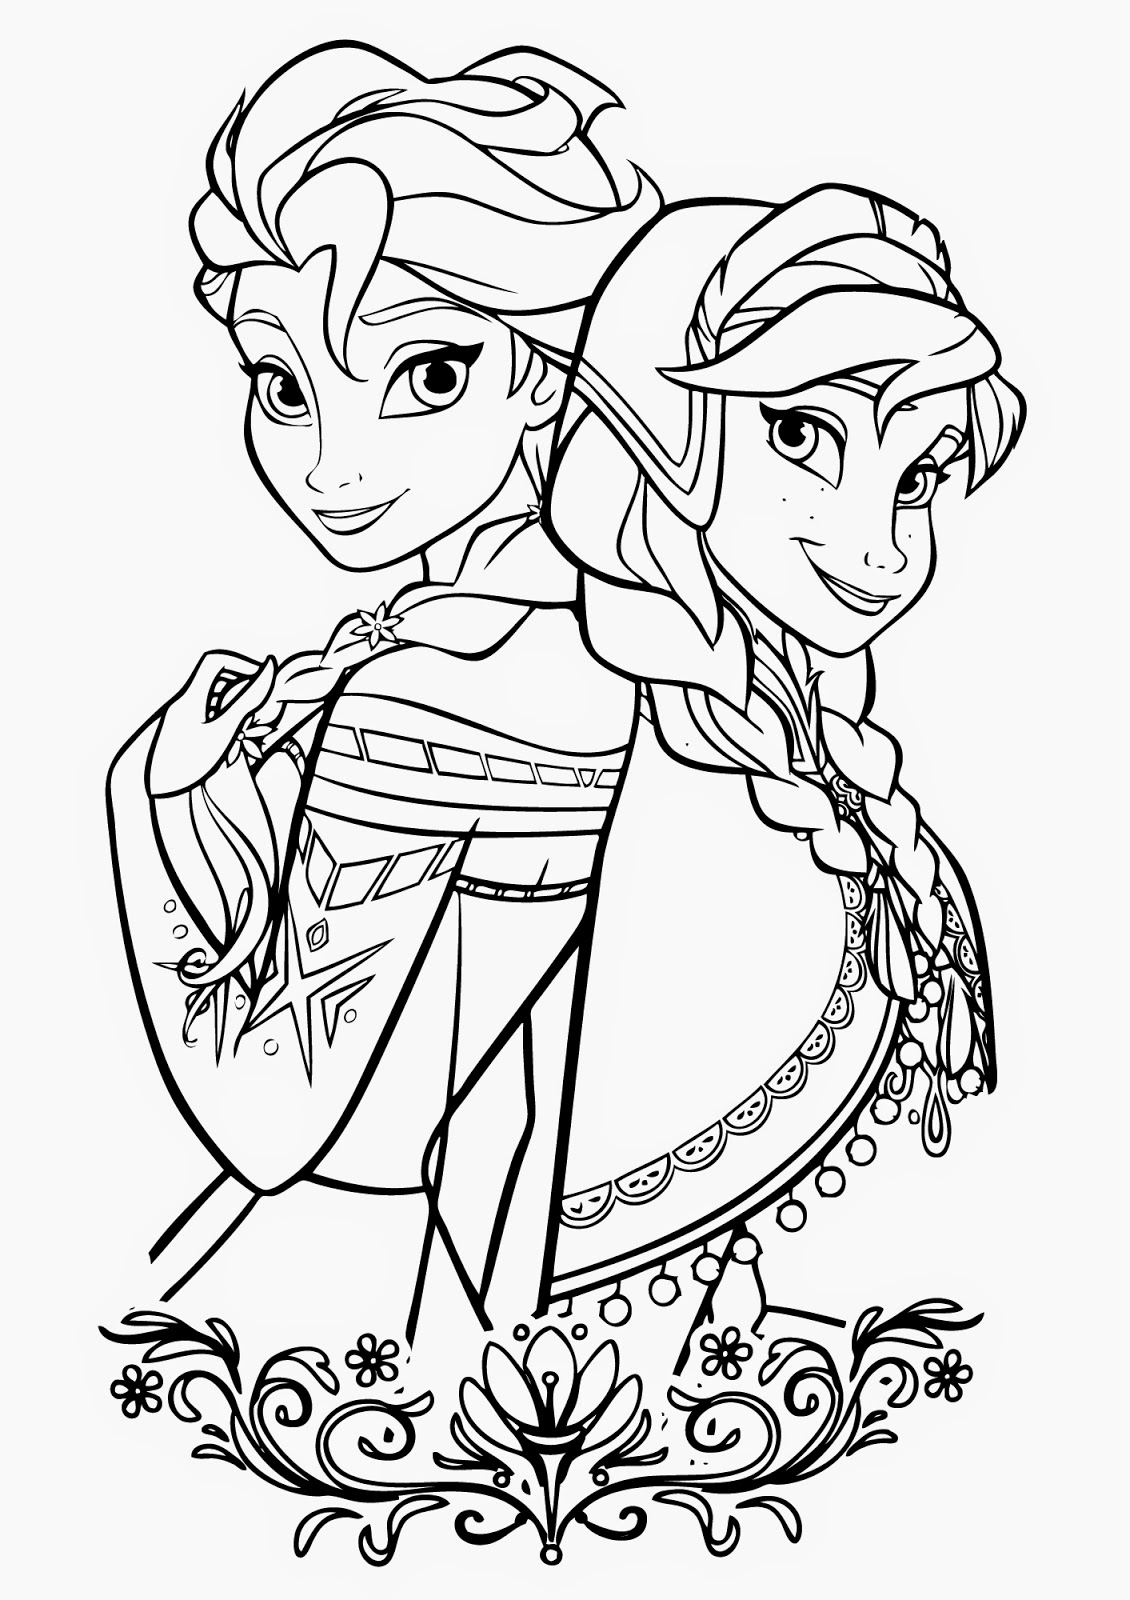 coloring pages frozen fun learn free worksheets for kid frozen disney frozen pages coloring 